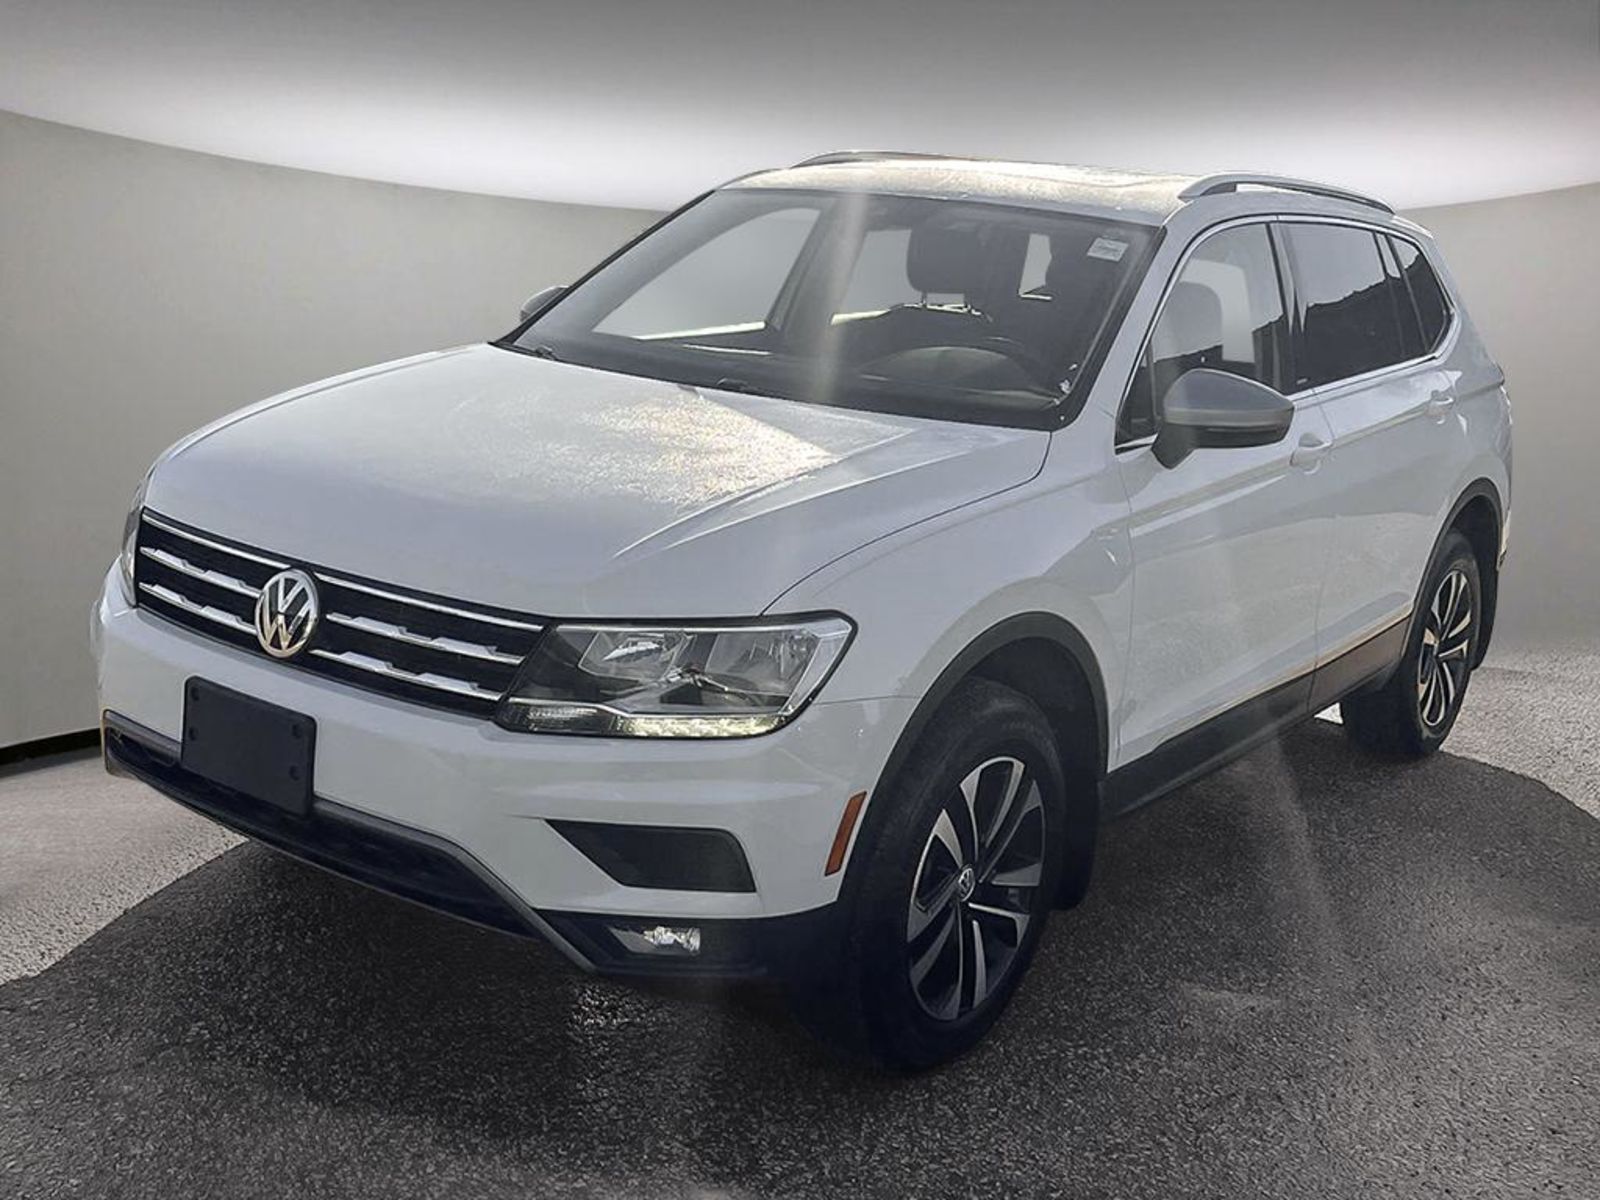 2020 Volkswagen Tiguan IQ Drive| Clean Carfax | Back-up Camera | Android 